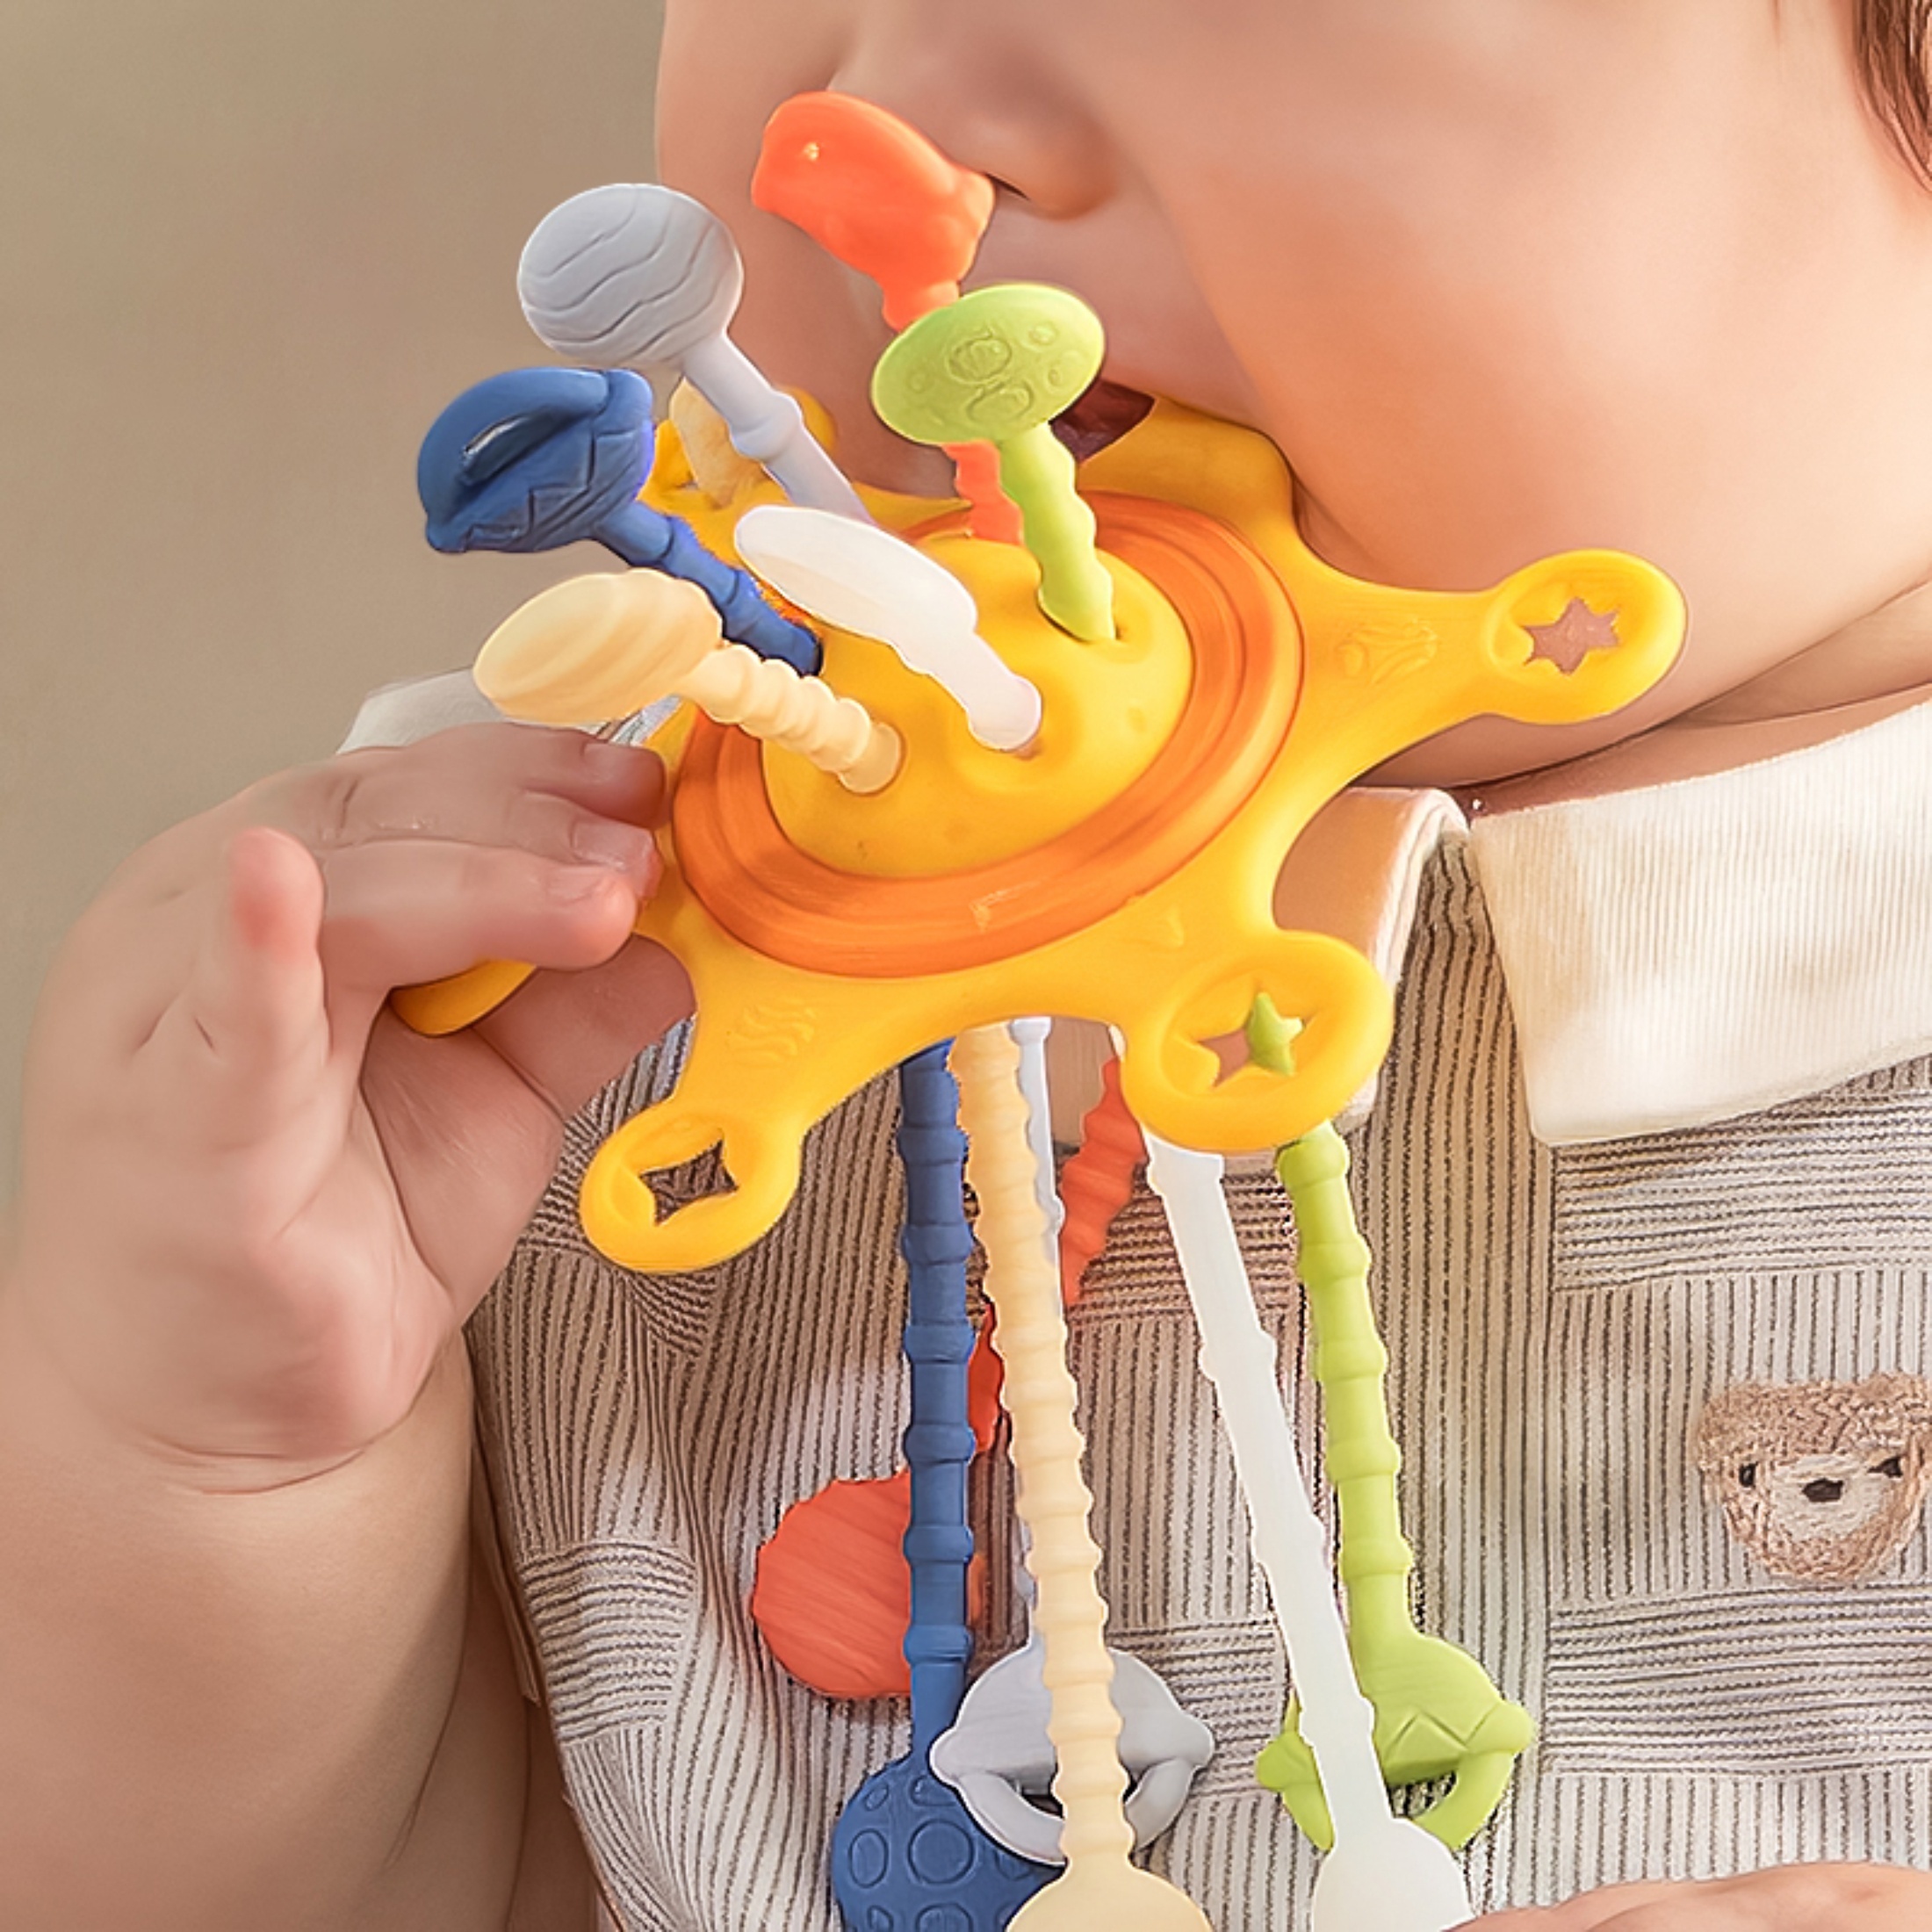 Baby Manhattan Hand Grab Ball Toy, Puzzle Early Education Teething Gum  Grinding Teeth Stick Baby Toy 0-1 Year 3-6 Months